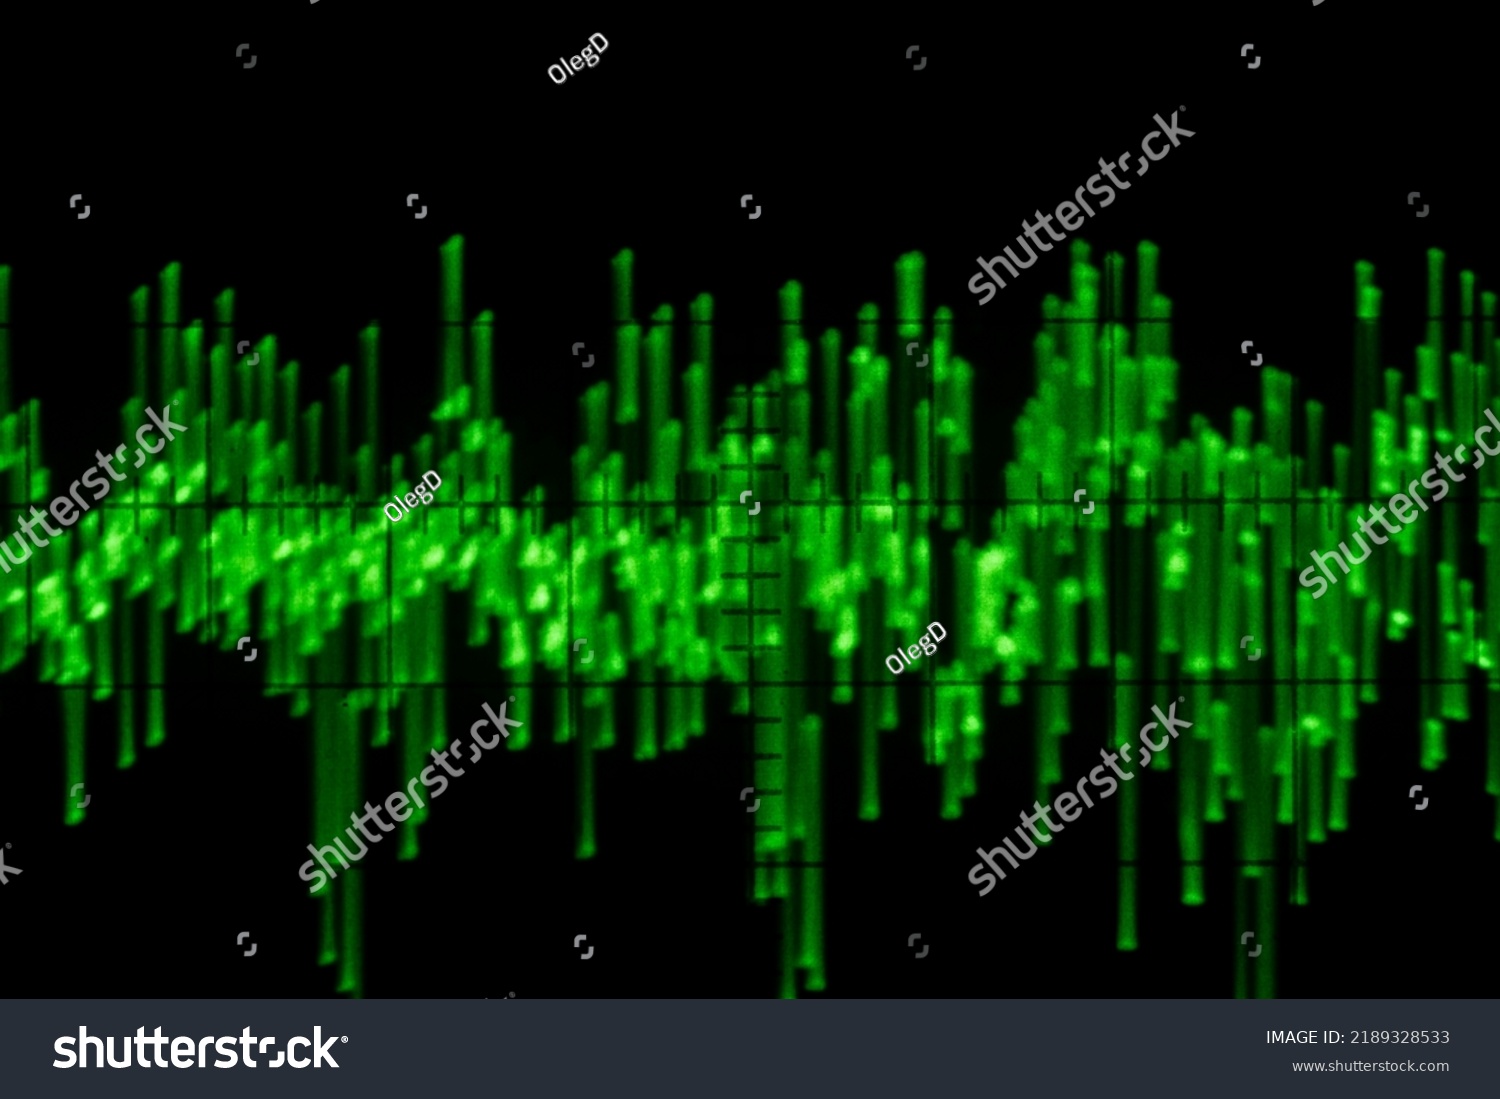 Audio signal on oscilloscope screen. Communication and electronics. Close up, blurred focus #2189328533